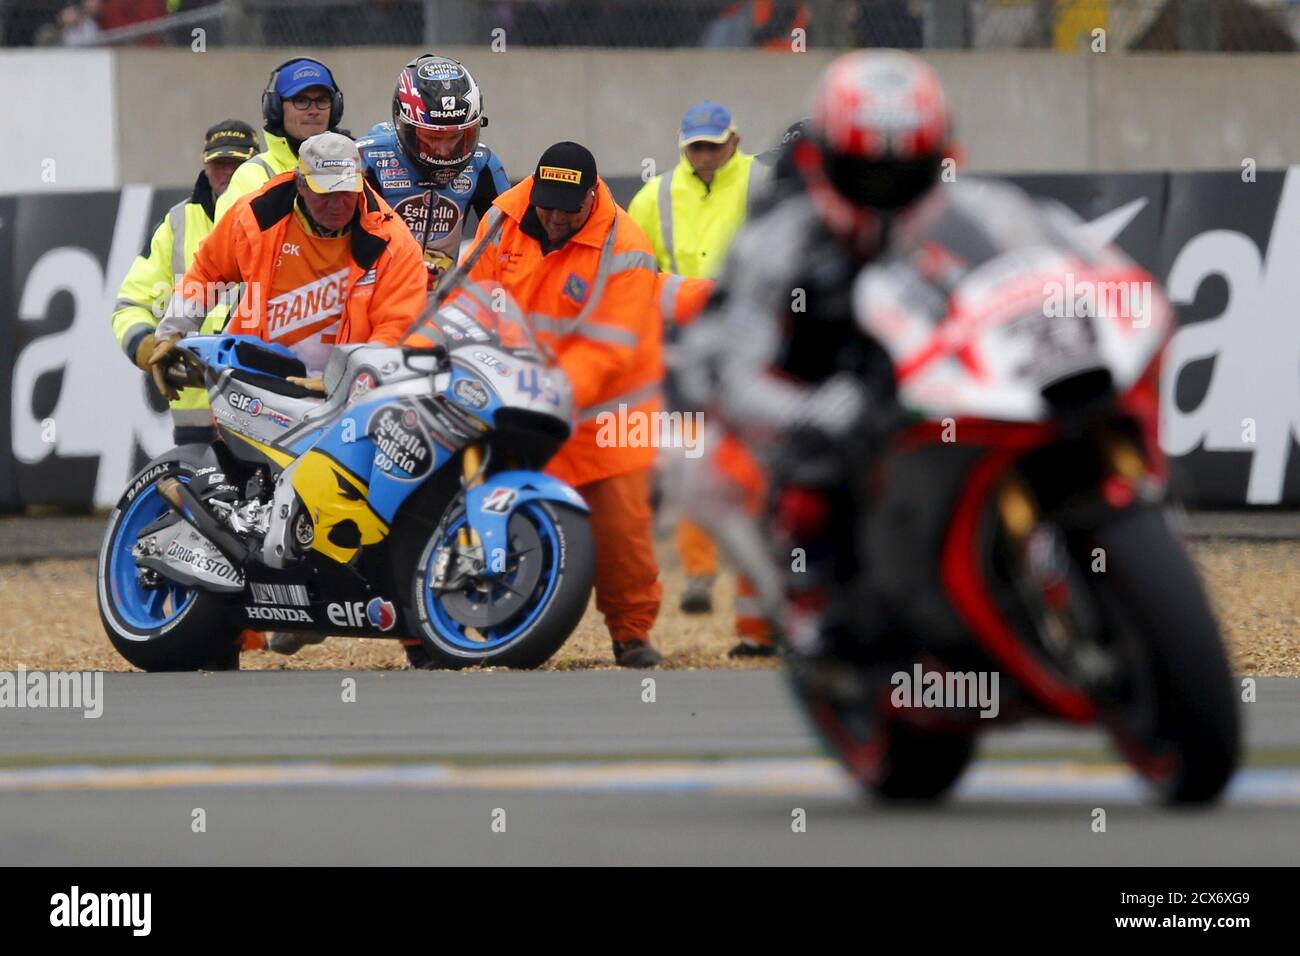 Track marshals push a motorcycle of Honda MotoGP rider Scott Redding of  Britain after he crashes during the qualifying session of the French Grand  Prix at the Le Mans circuit, in Le